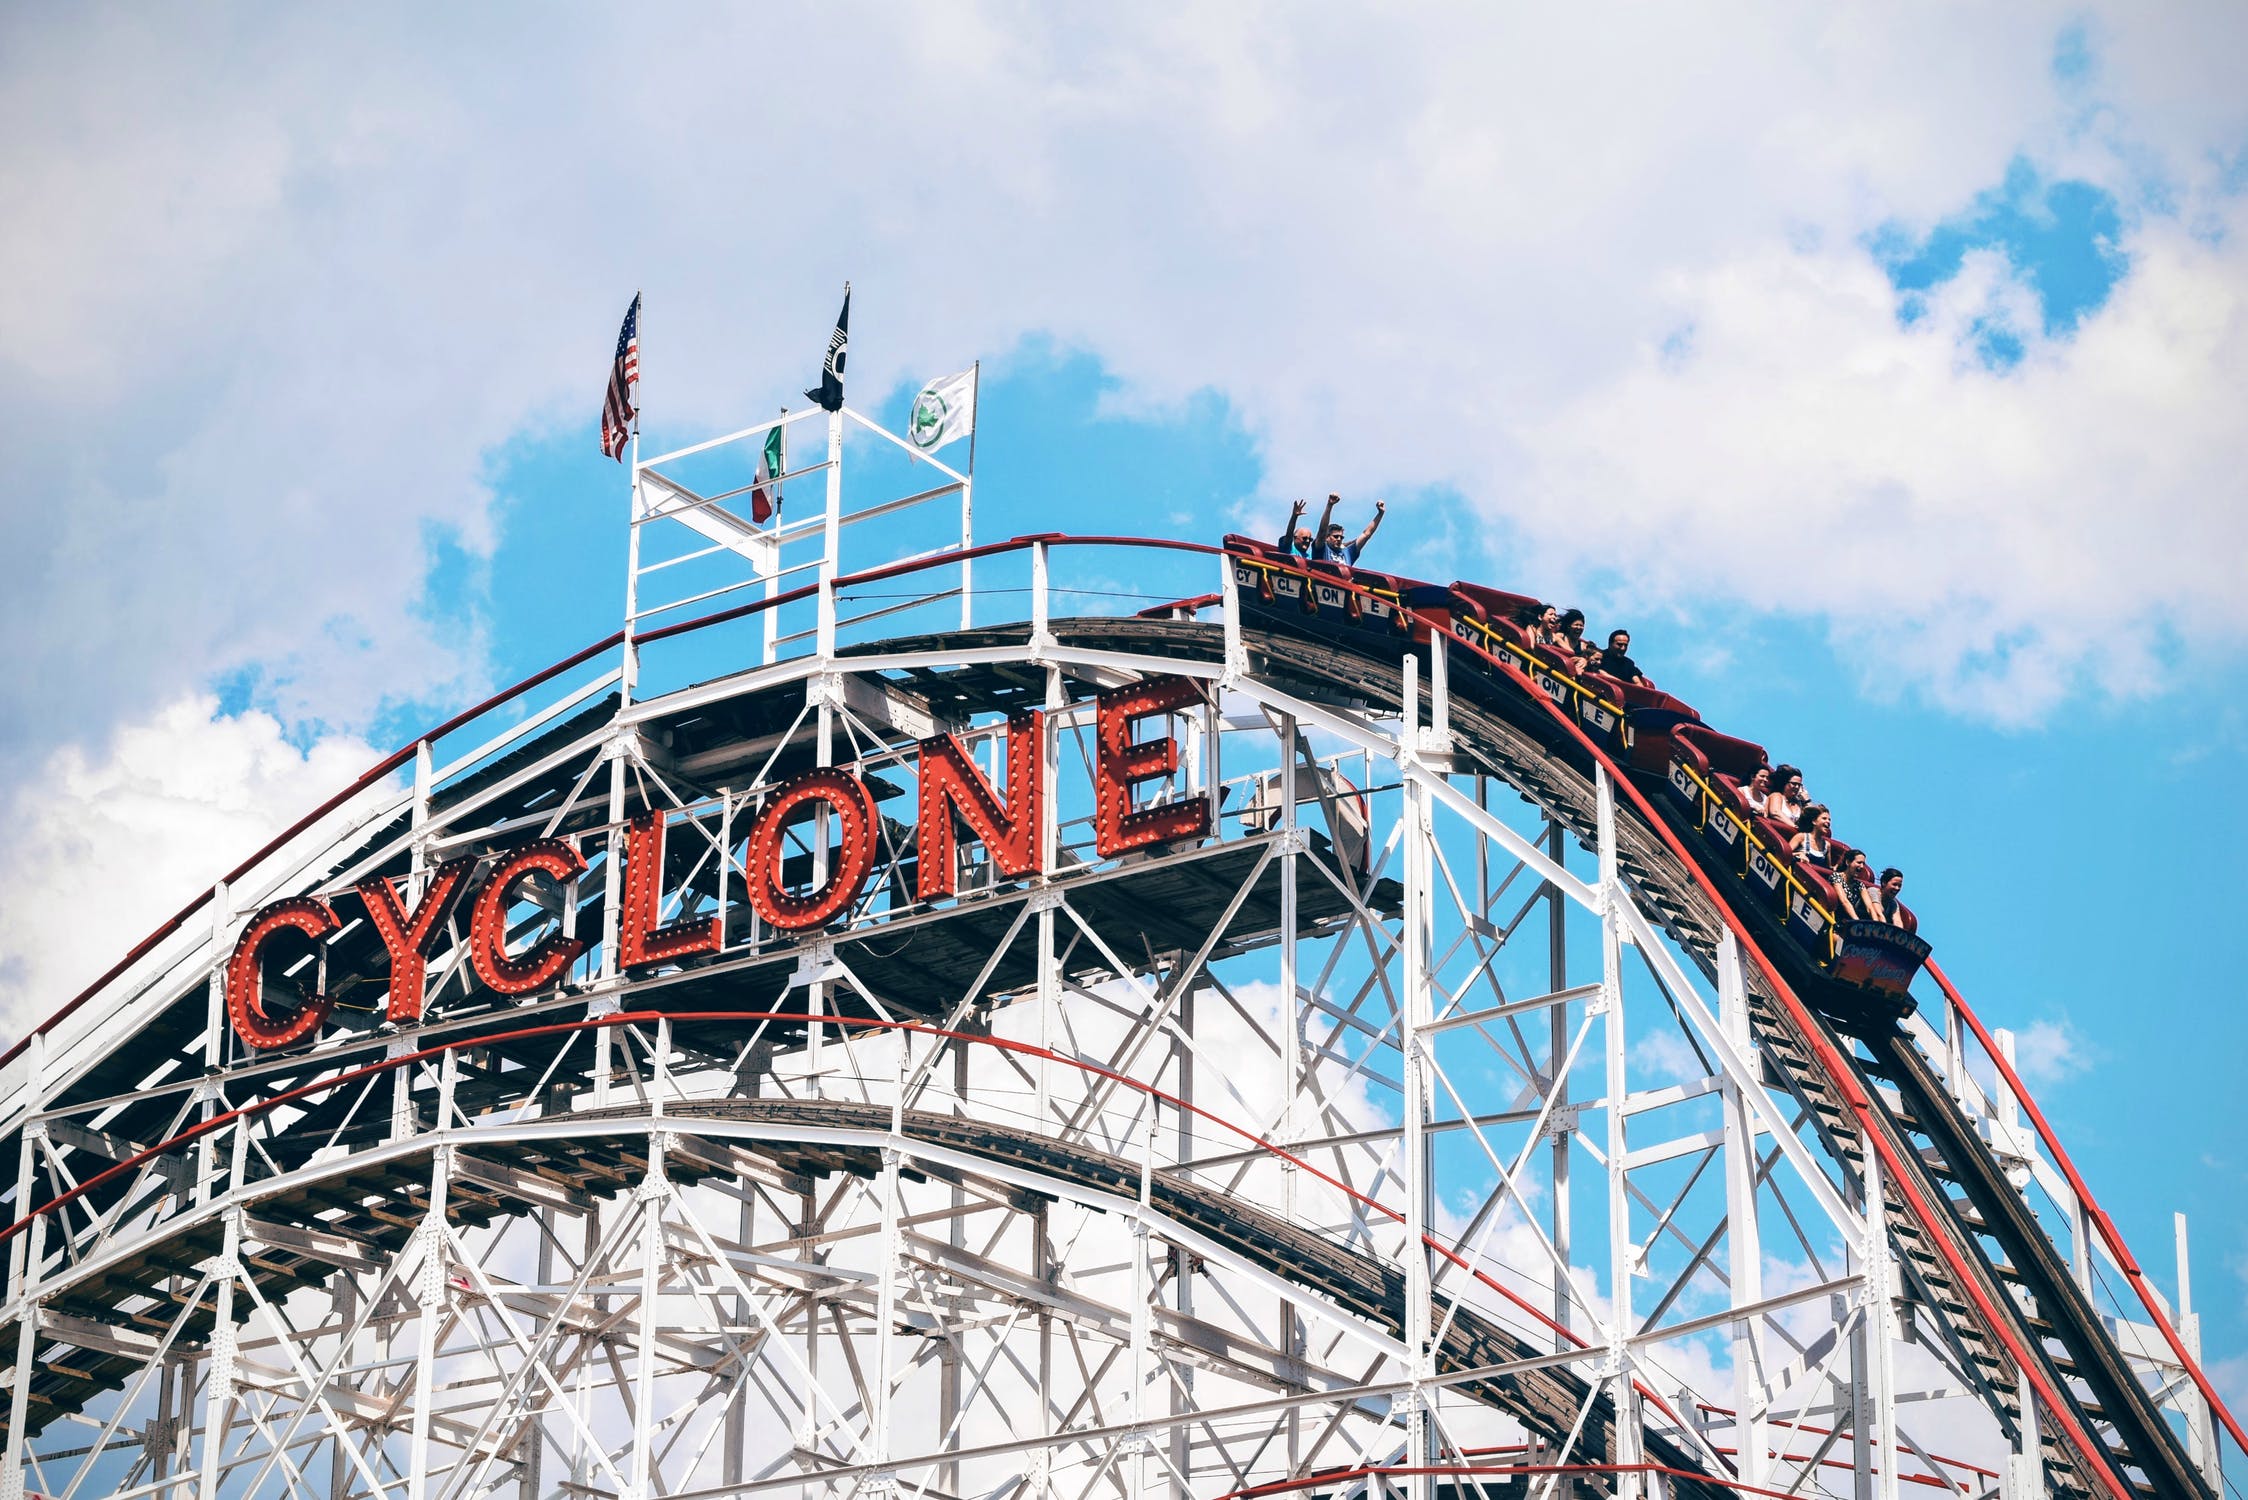 [Blog Post] - The Emotional Roller Coaster of Investing | The Retirement Planning Group